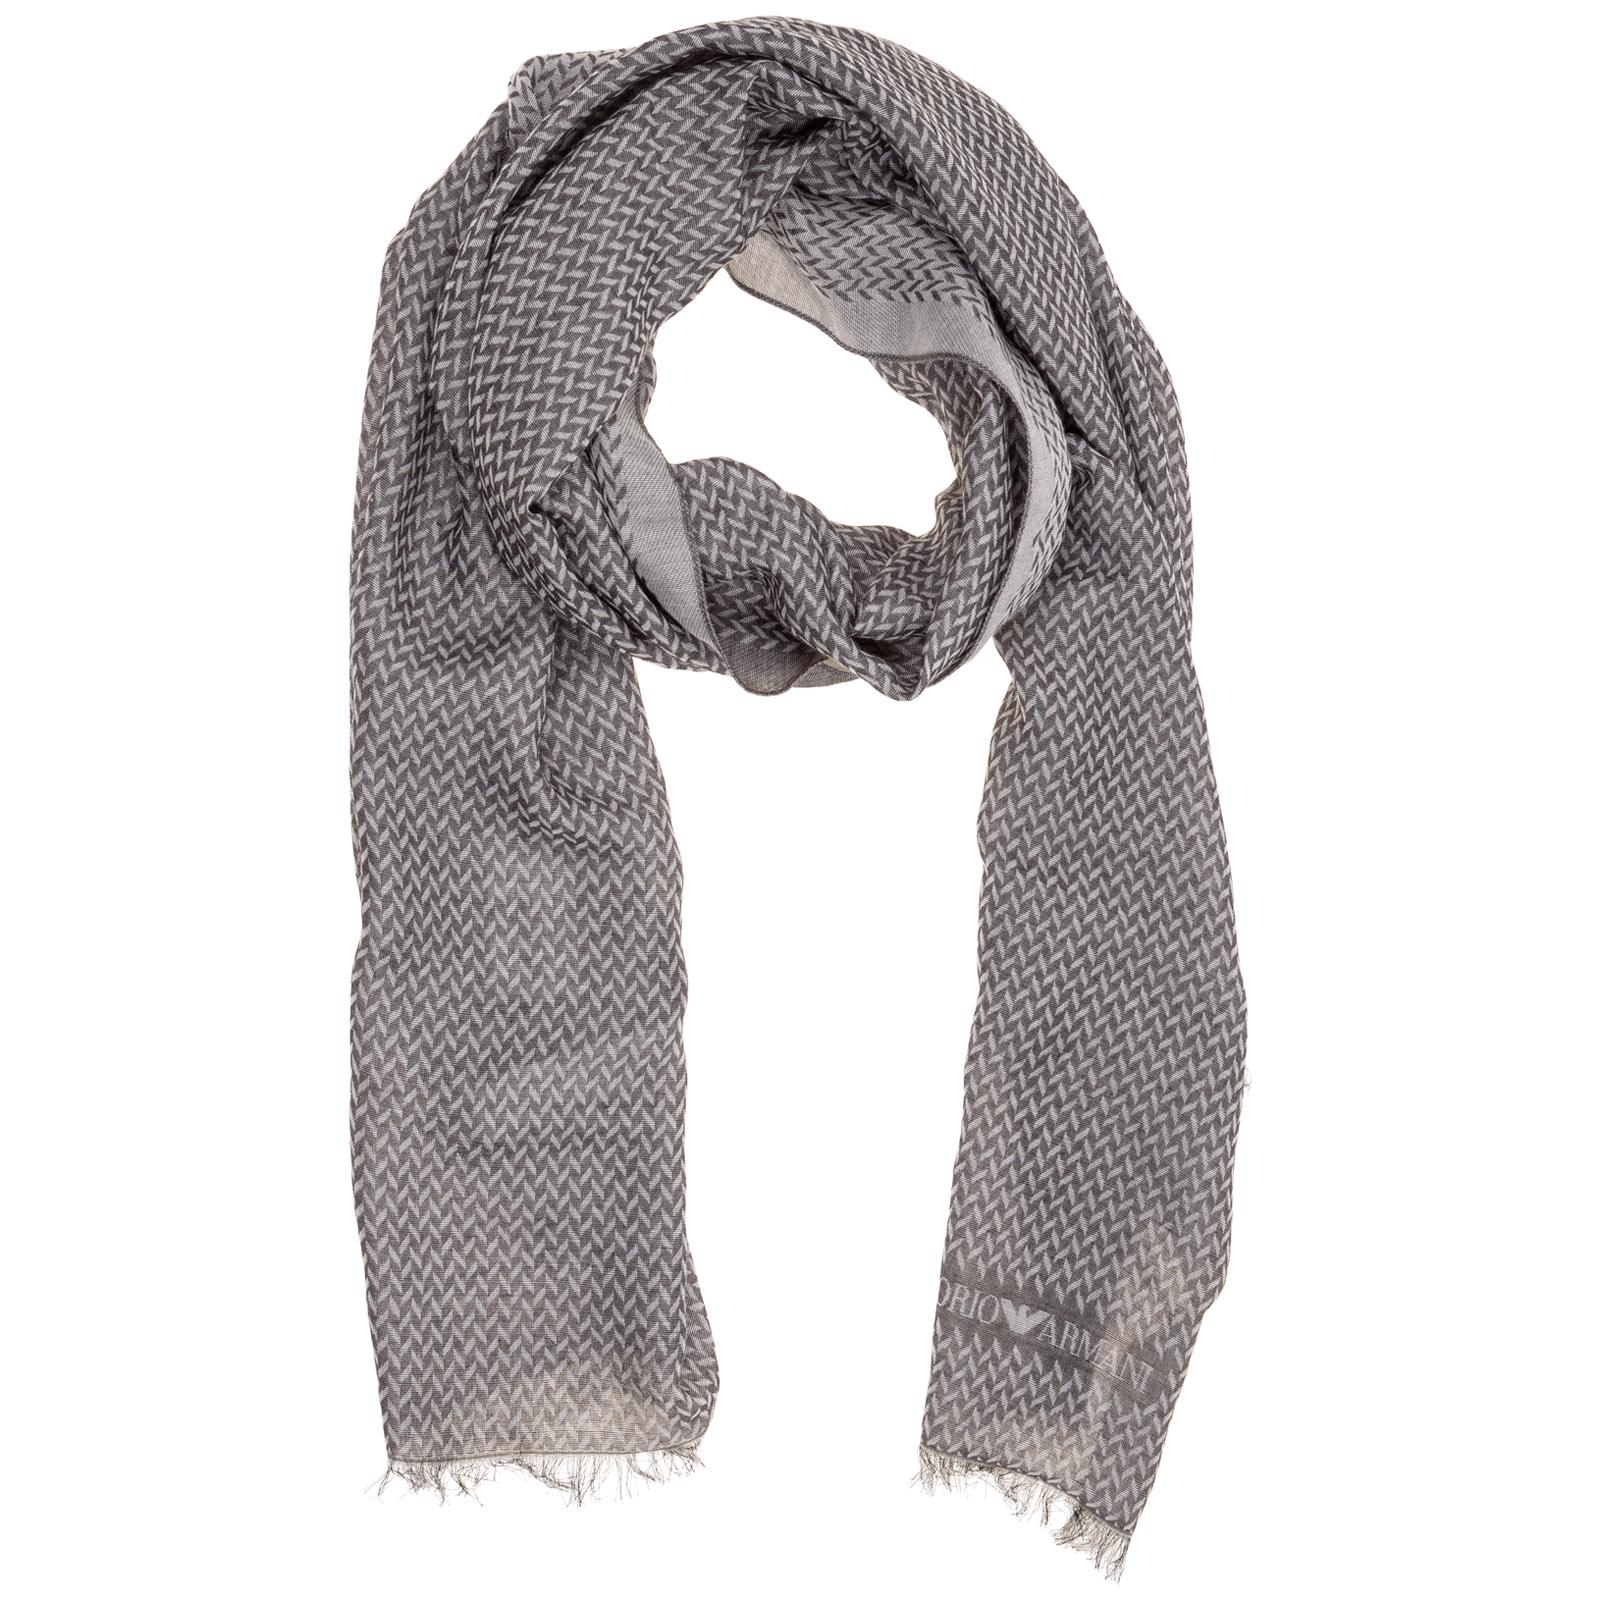 Emporio Armani Synthetic Scarf in Gray for Men - Lyst